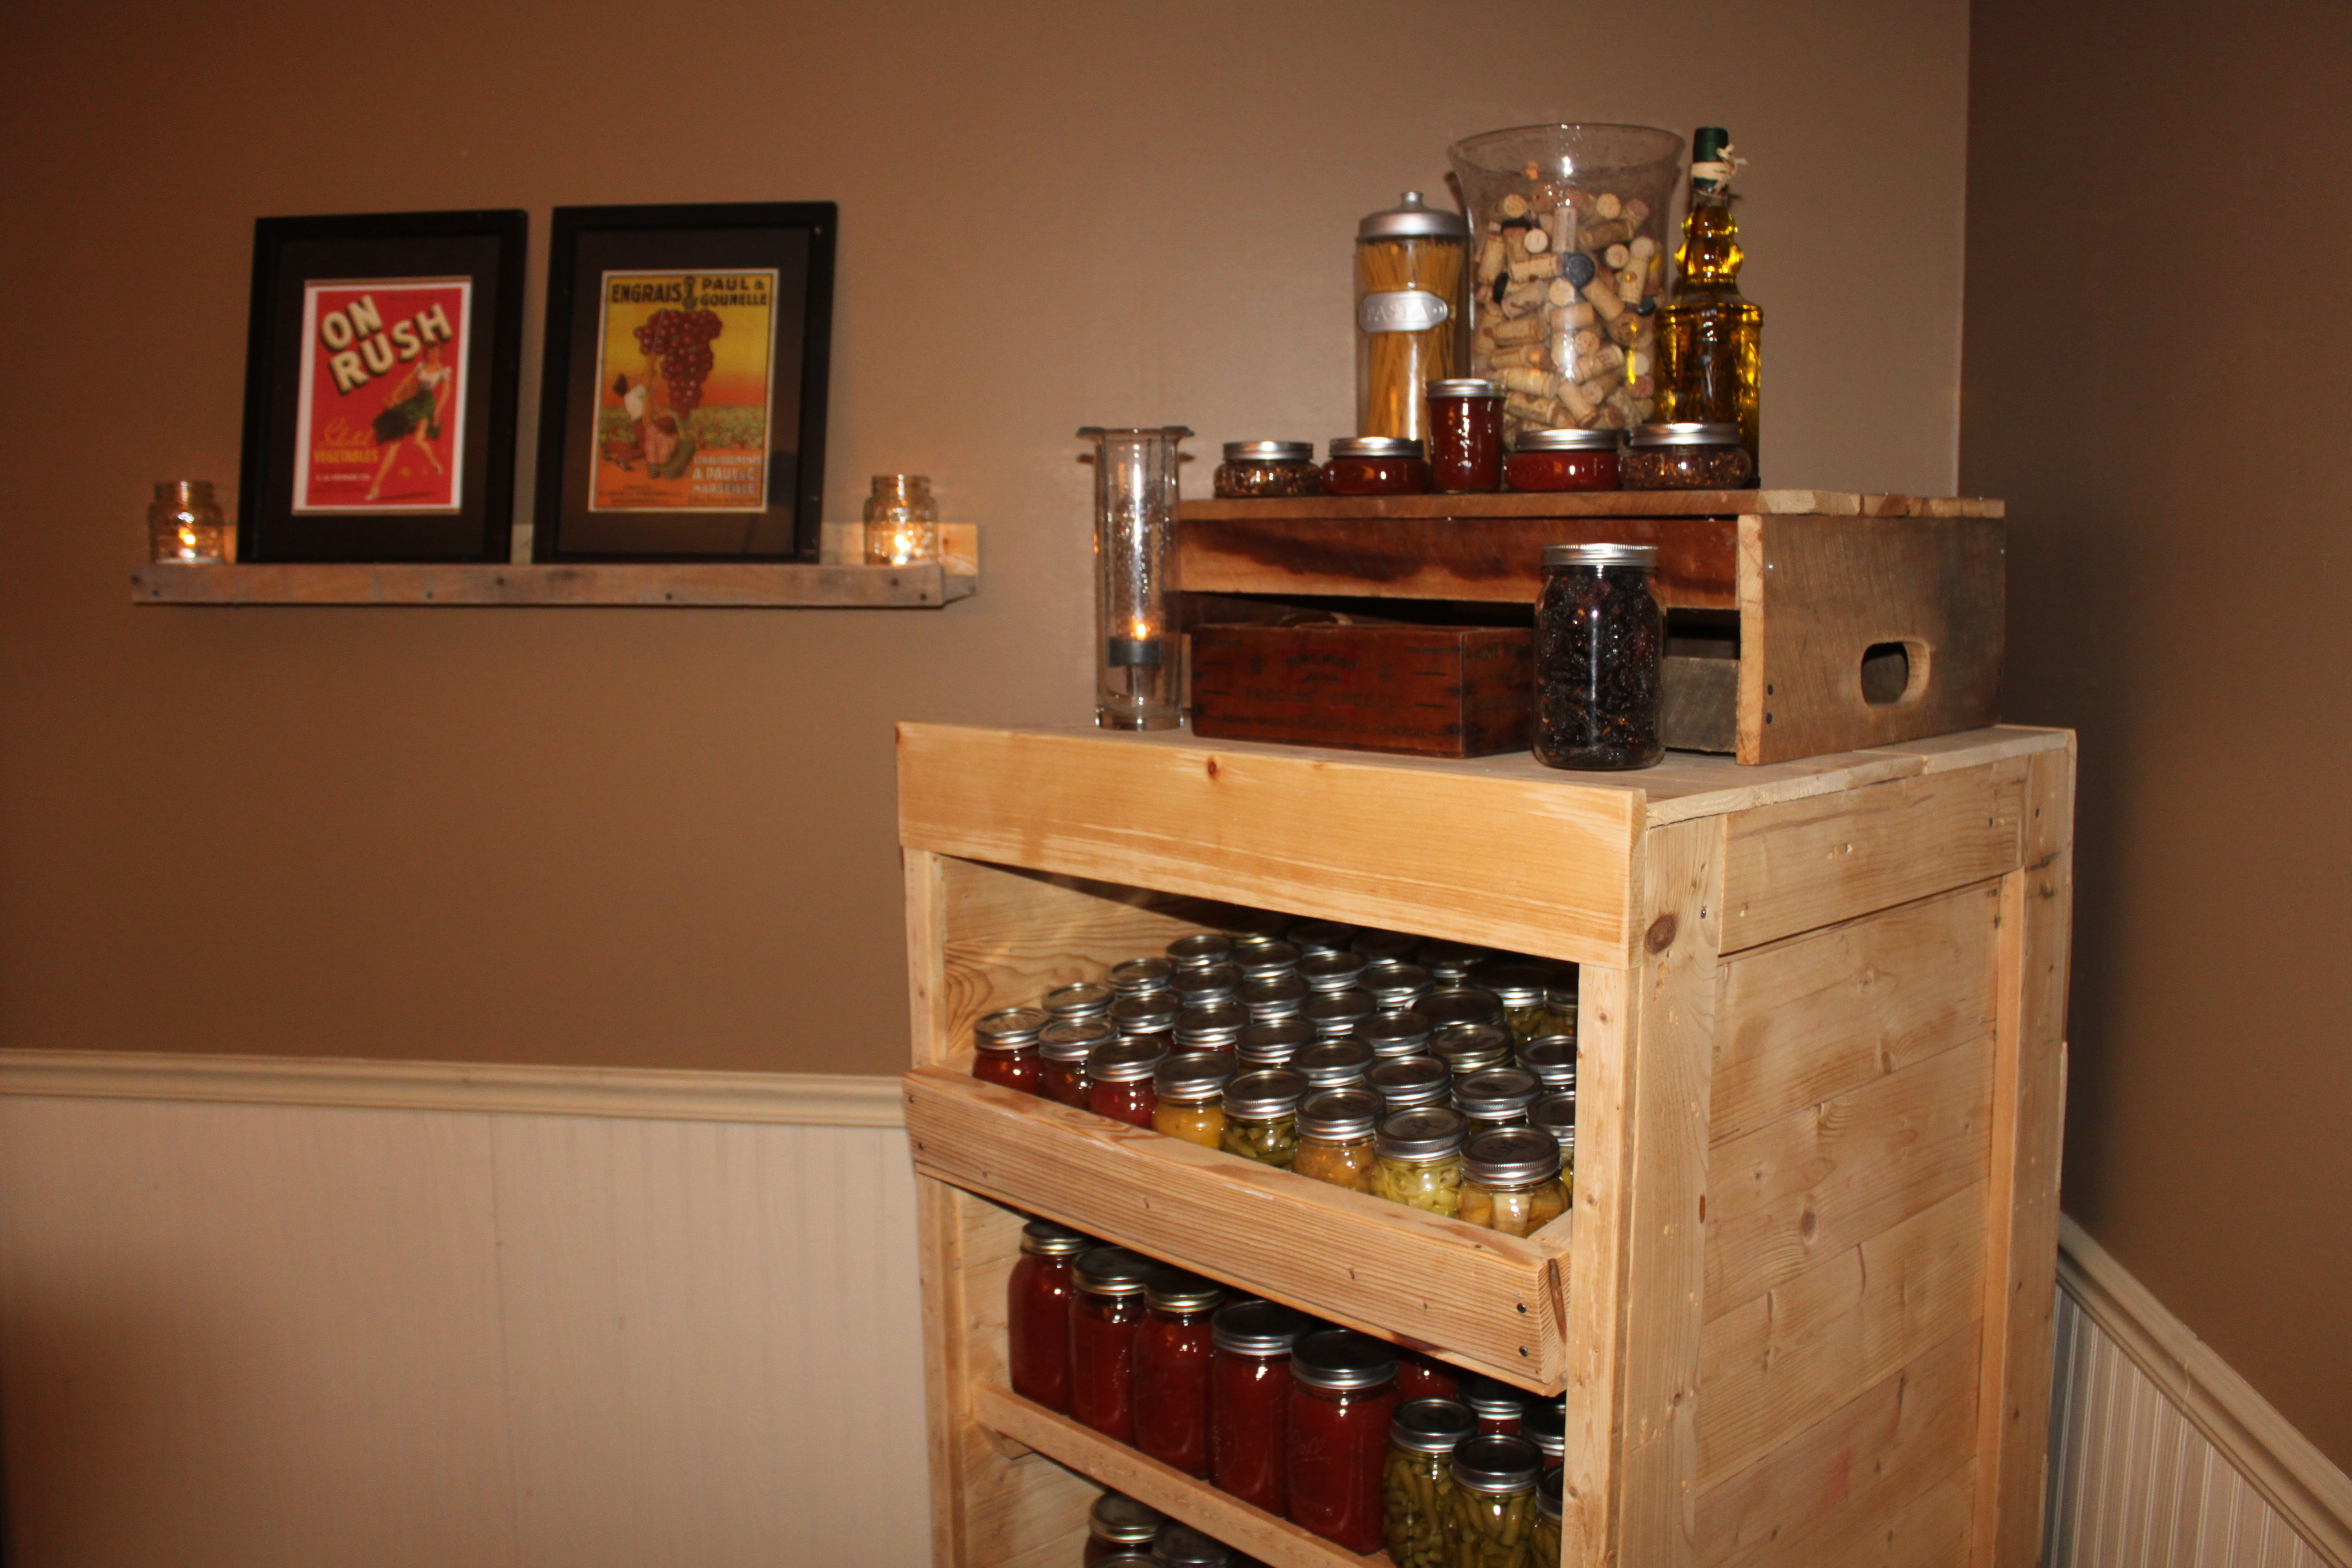 Using Pallets to Build A Canning Pantry Cupboard | Old World Garden ...